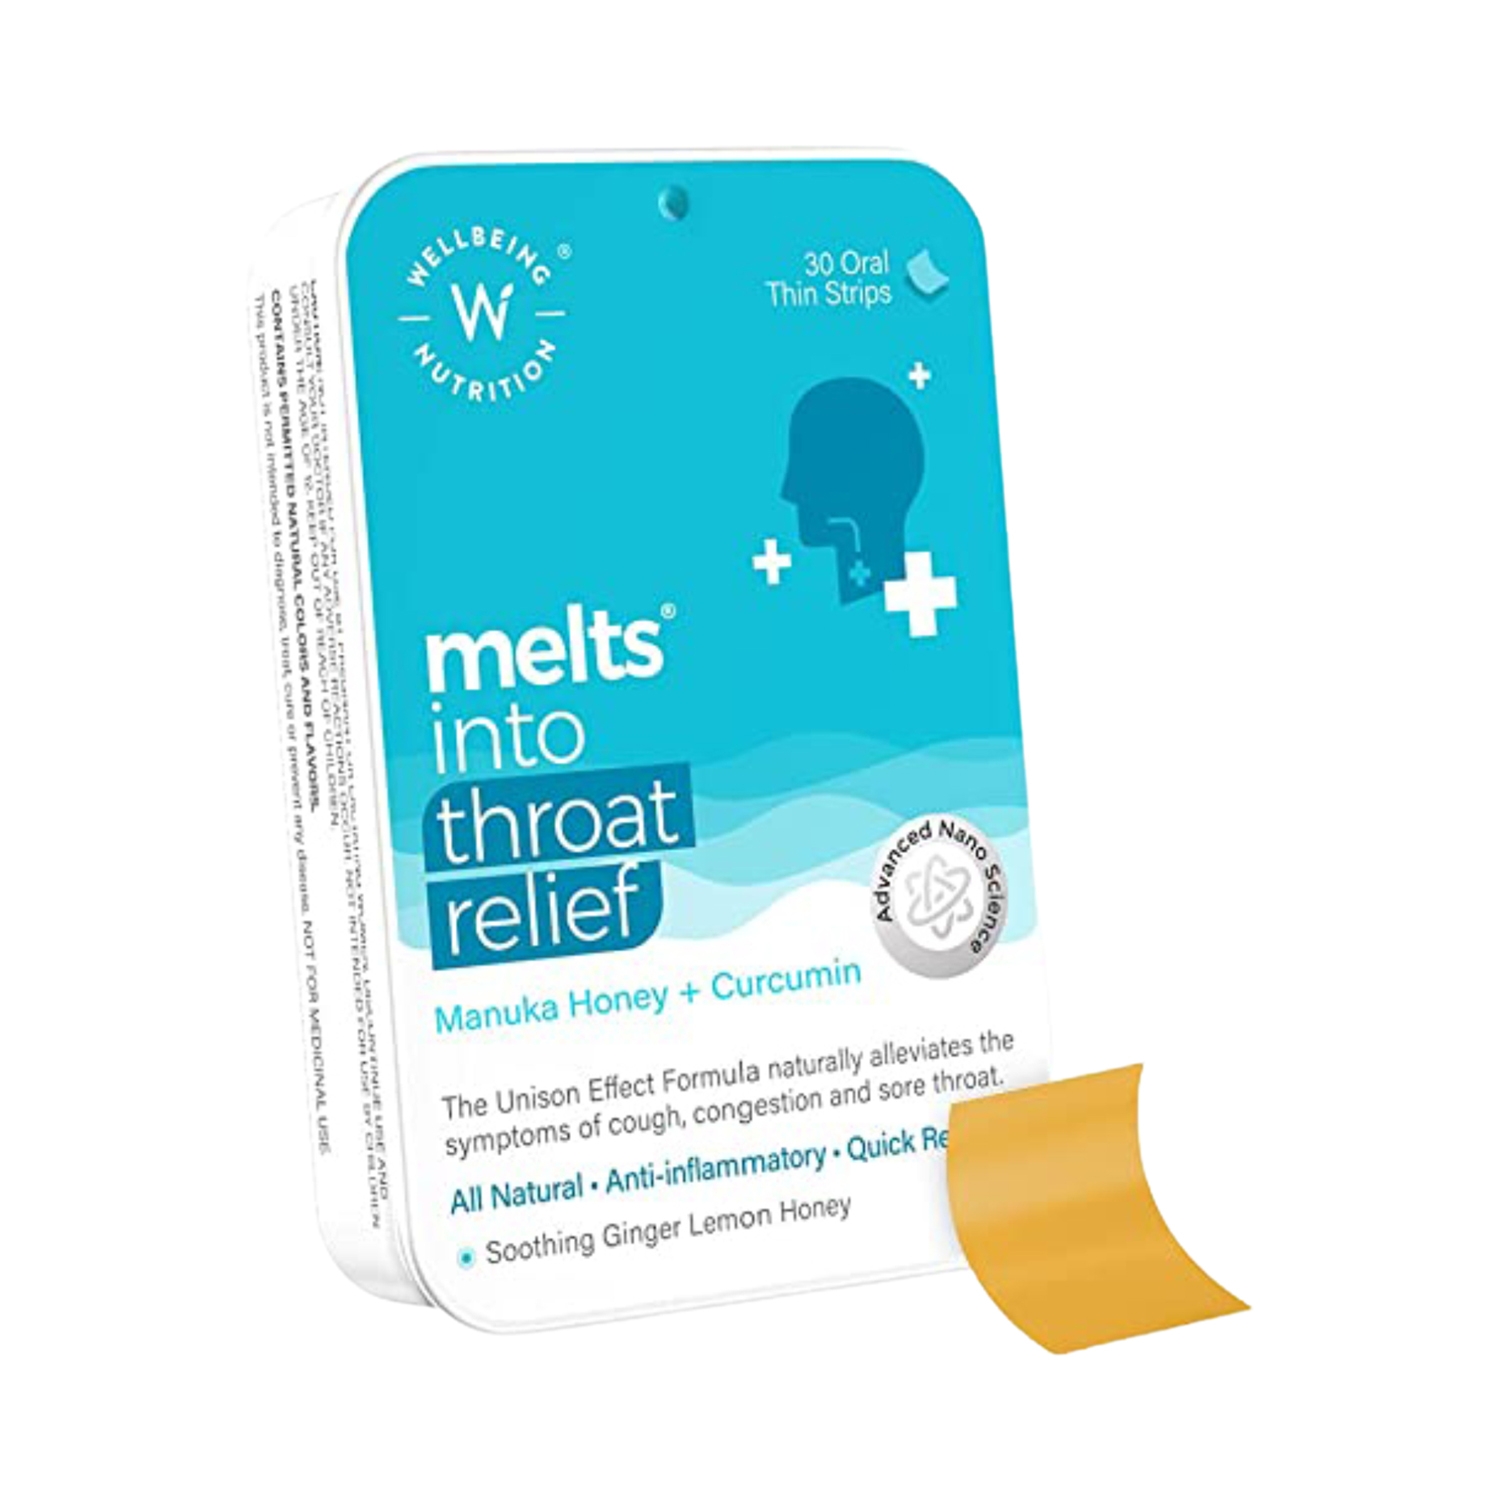 Wellbeing Nutrition | Wellbeing Nutrition Melts Throat Relief for Cough ,Sore Throat Relief & Pain Relief